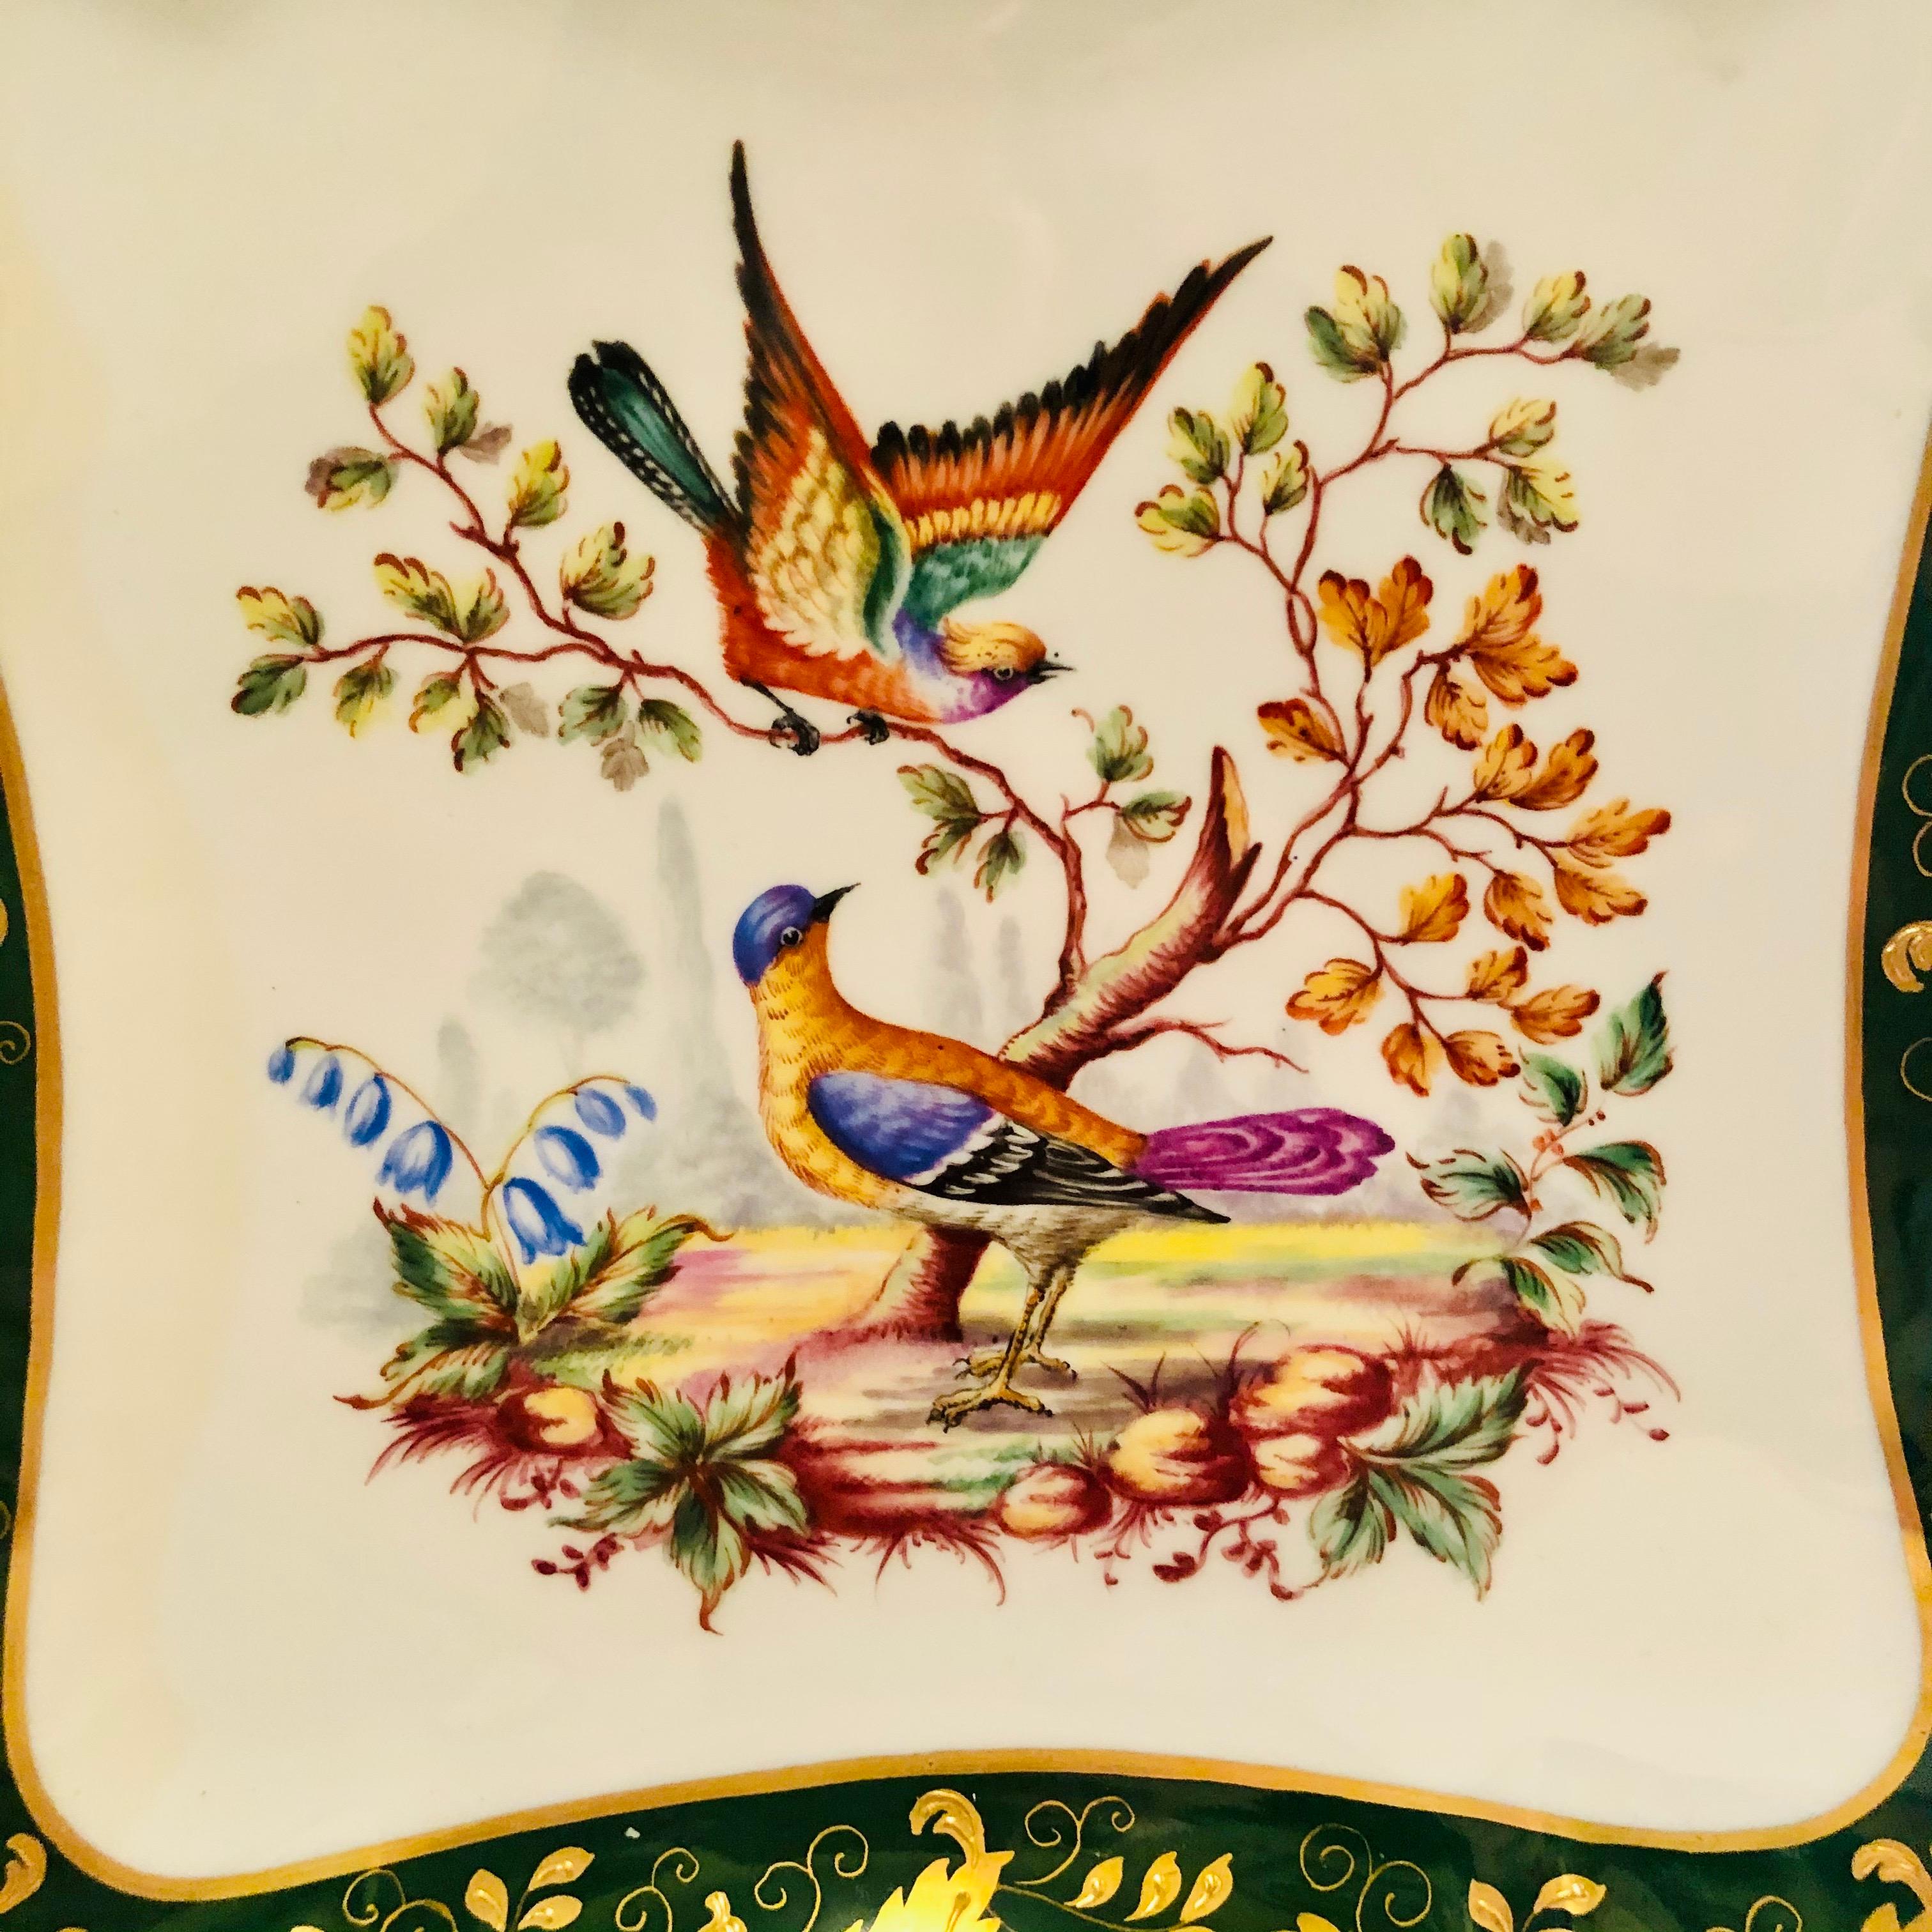 Porcelain Le Tallec Green Bowl Painted with Colorful Birds with a Raised Gold Border